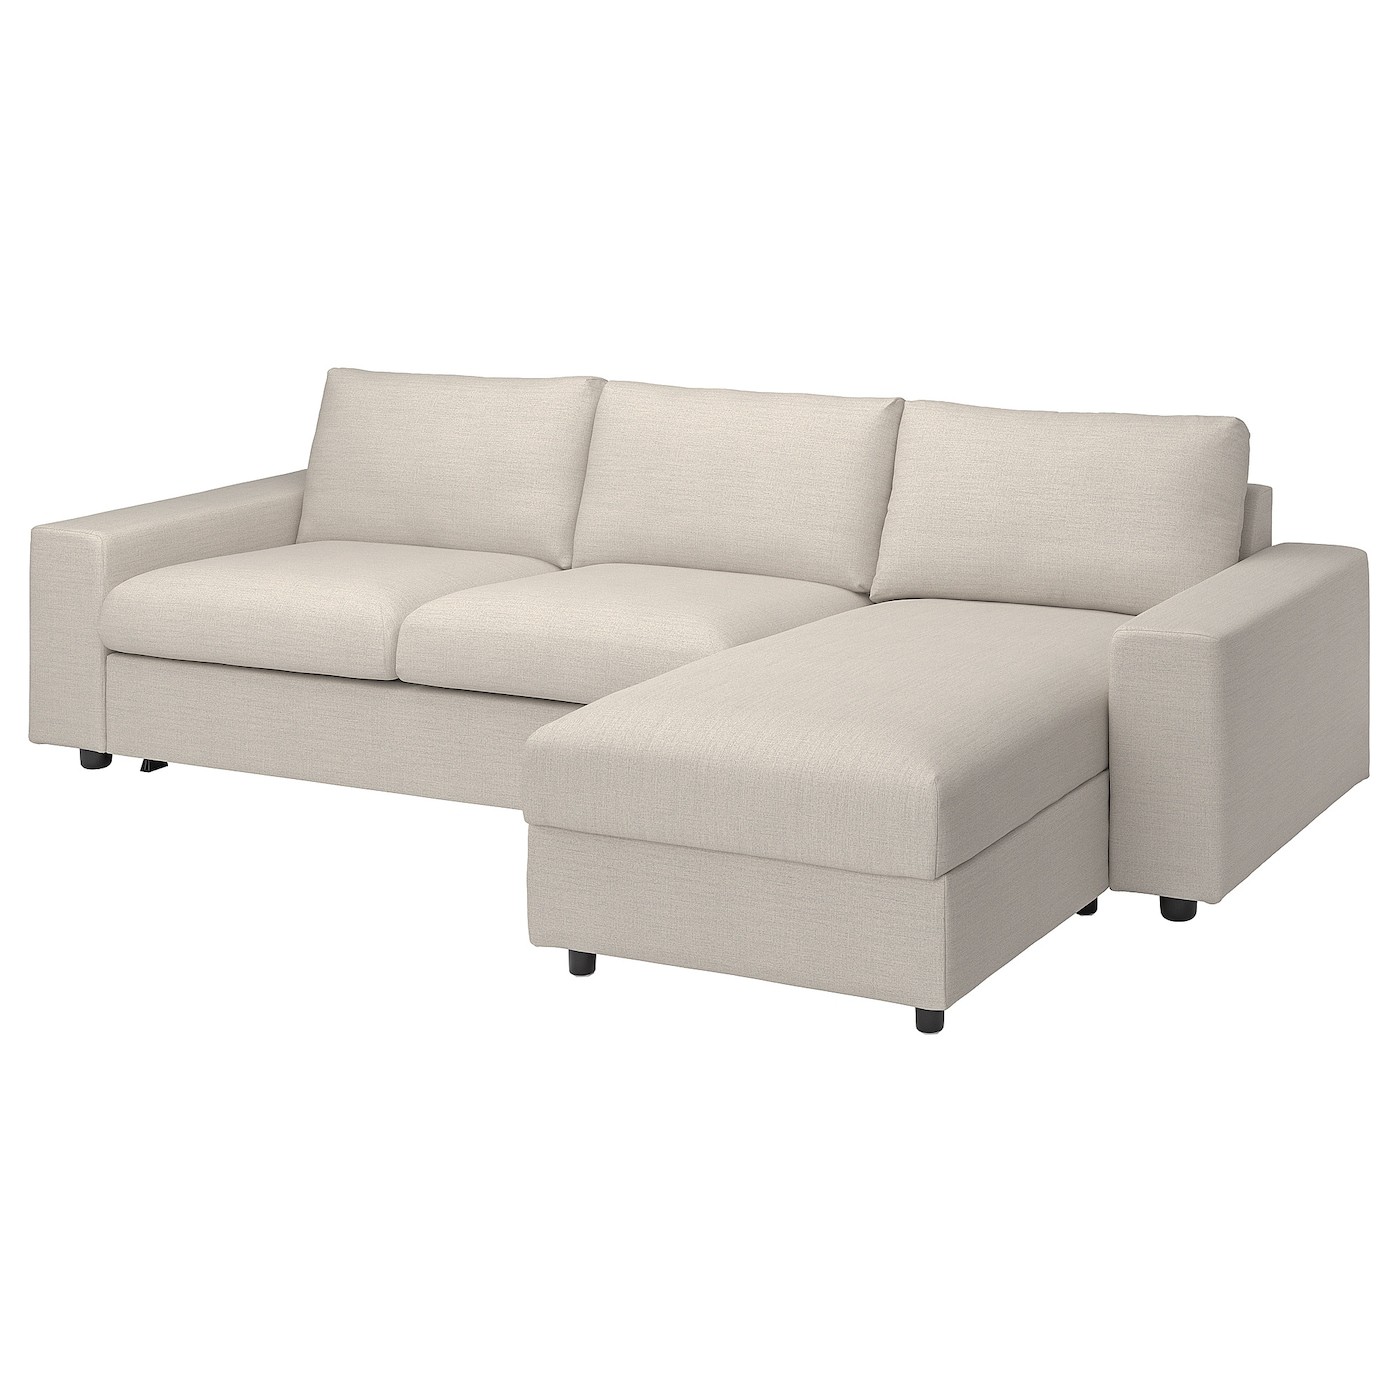 VIMLE Cover 3-seat sofa-bed w chaise lng